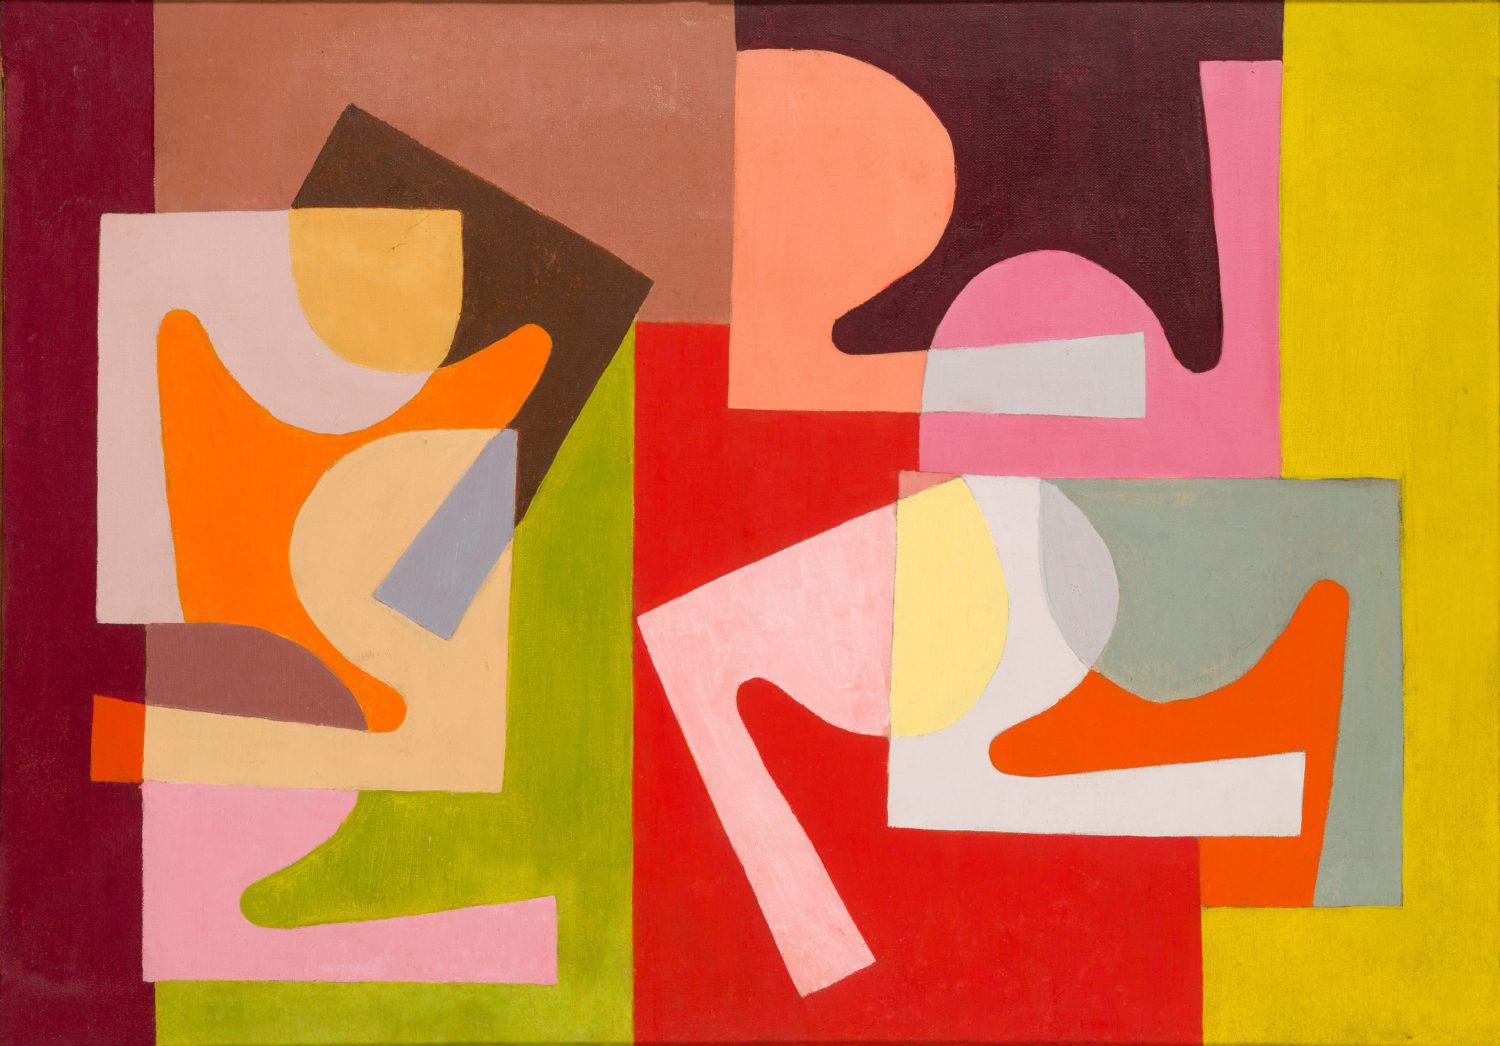 Women in abstraction. Another History of abstraction in the 20th century - AWARE